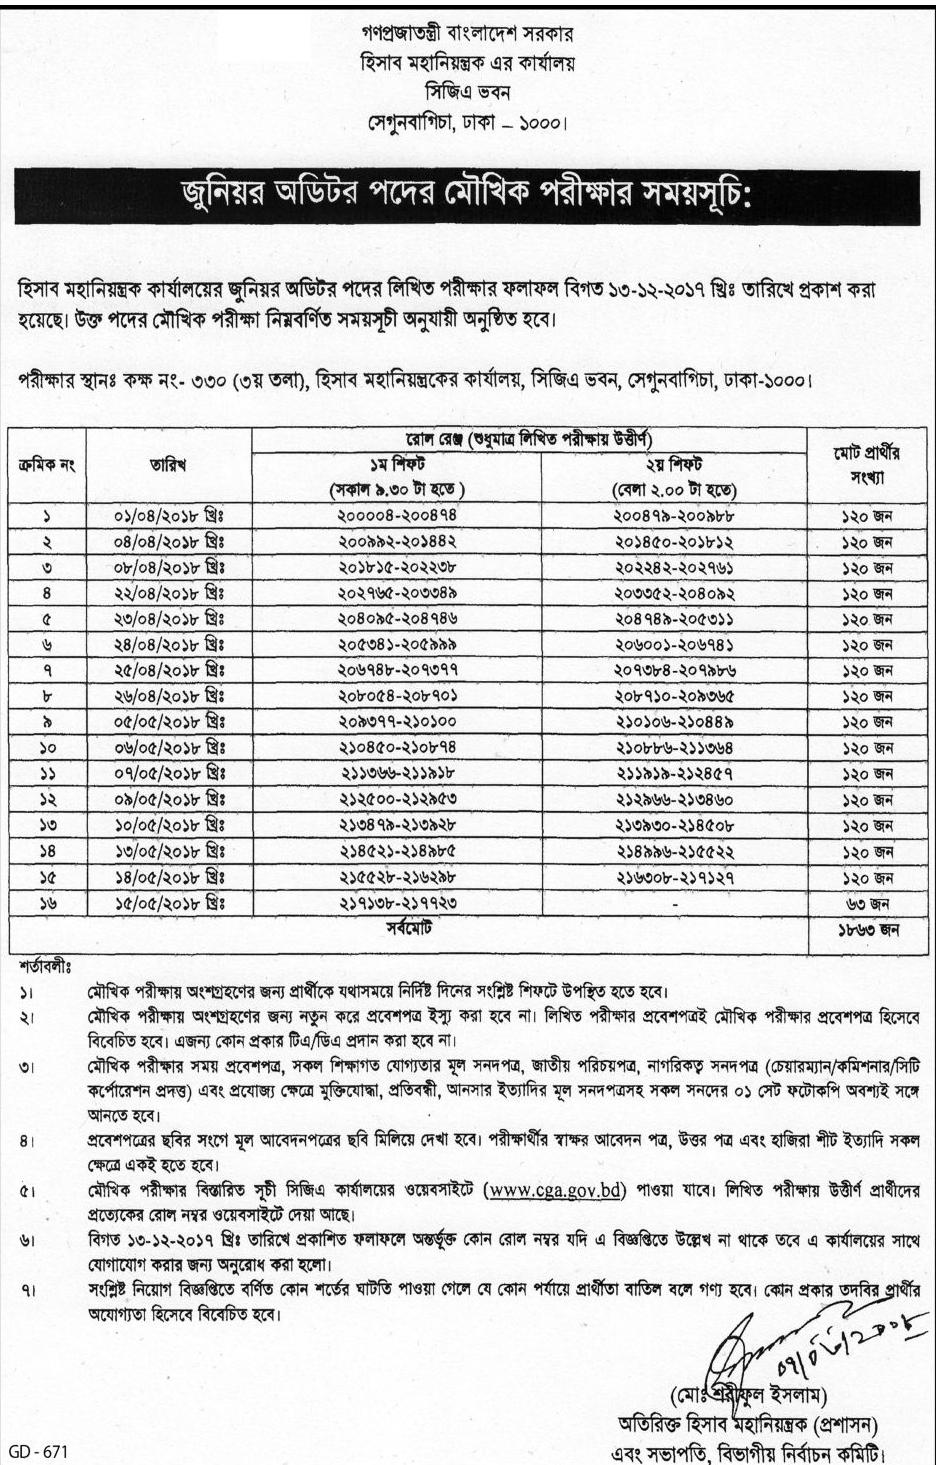 Controller General of Accounts (CGA) Junior Auditor Viva Test Date, Time and Seat Plan